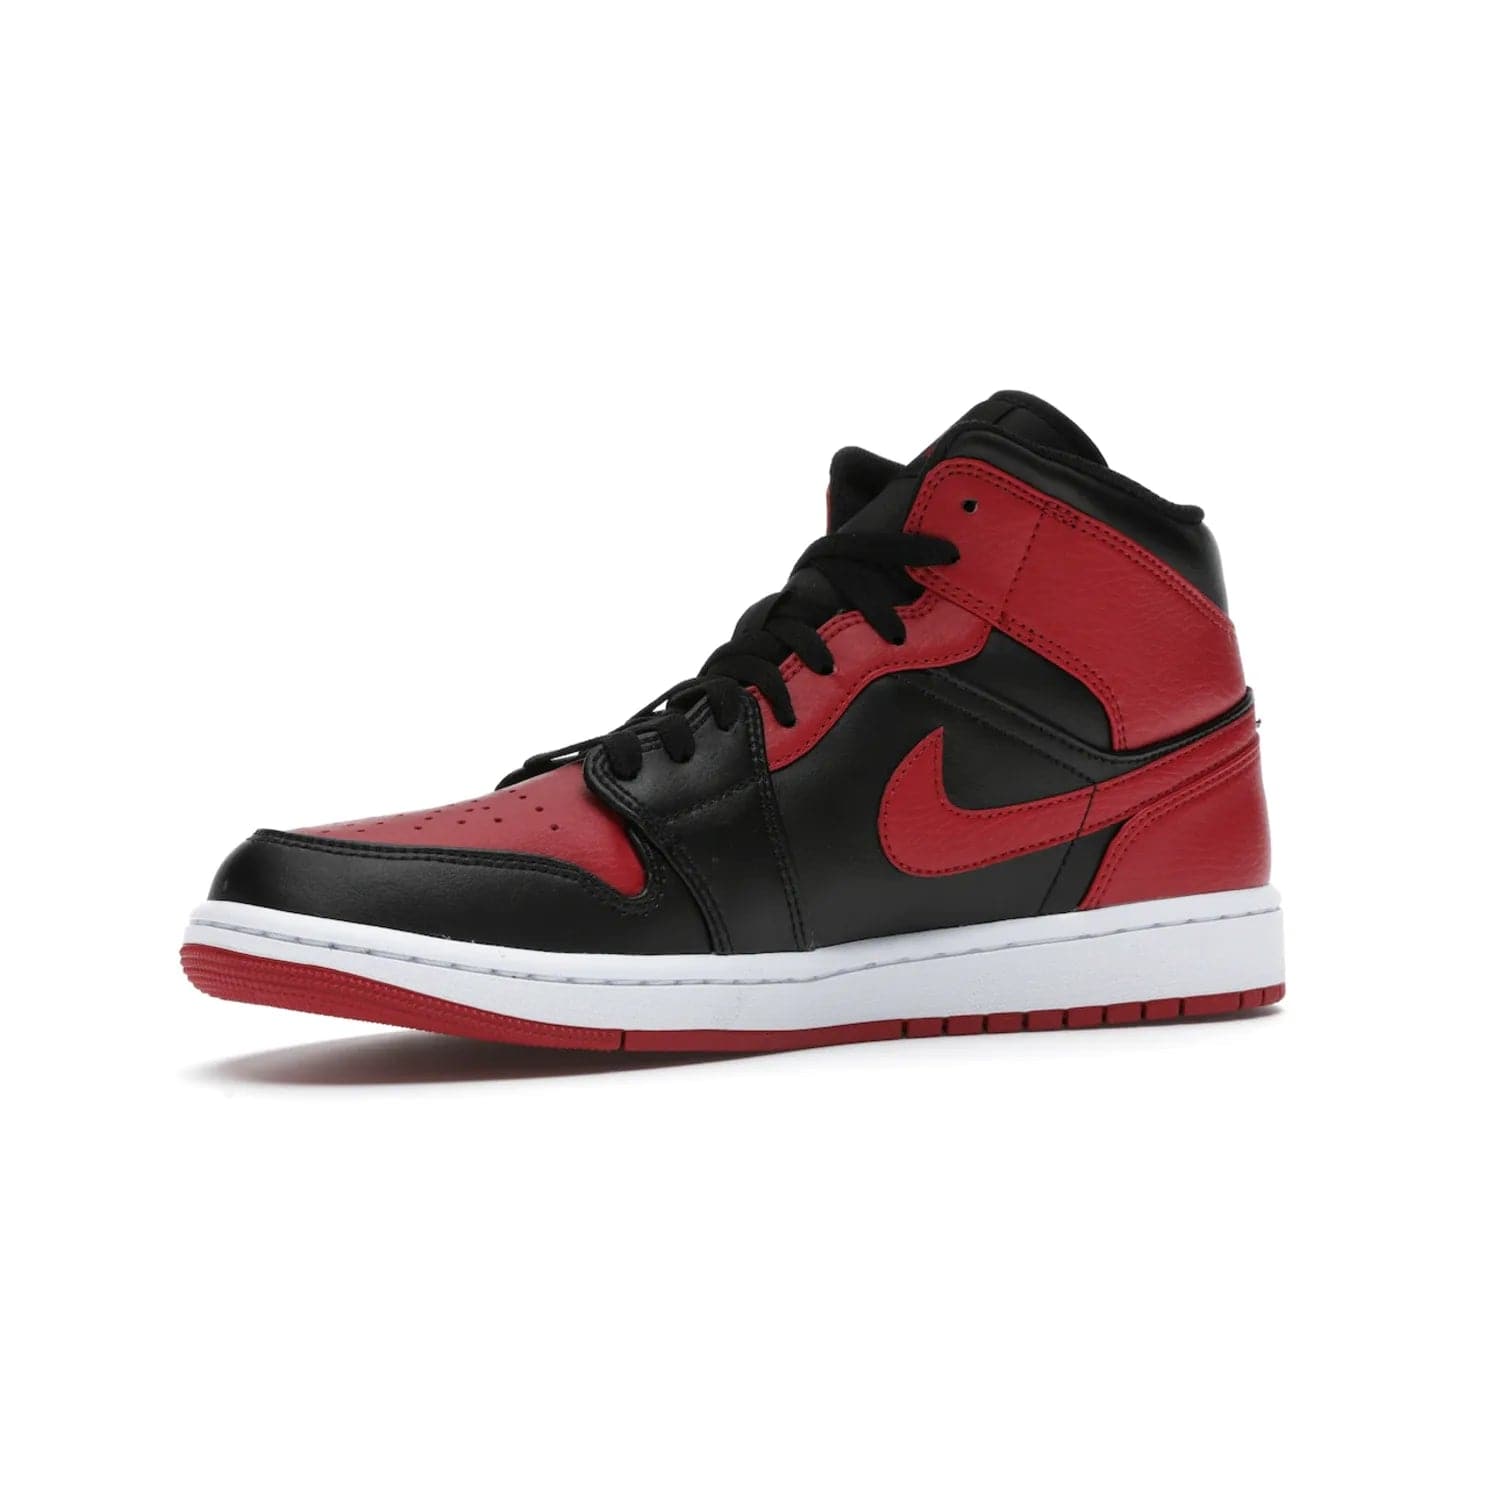 Jordan 1 Mid Banned (2020) - Image 16 - Only at www.BallersClubKickz.com - The Air Jordan 1 Mid Banned (2020) brings a modern twist to the classic Banned colorway. Features full-grain black and red leather uppers, red leather around the toe, collar, heel, & Swoosh. Release November 2021 for $110.